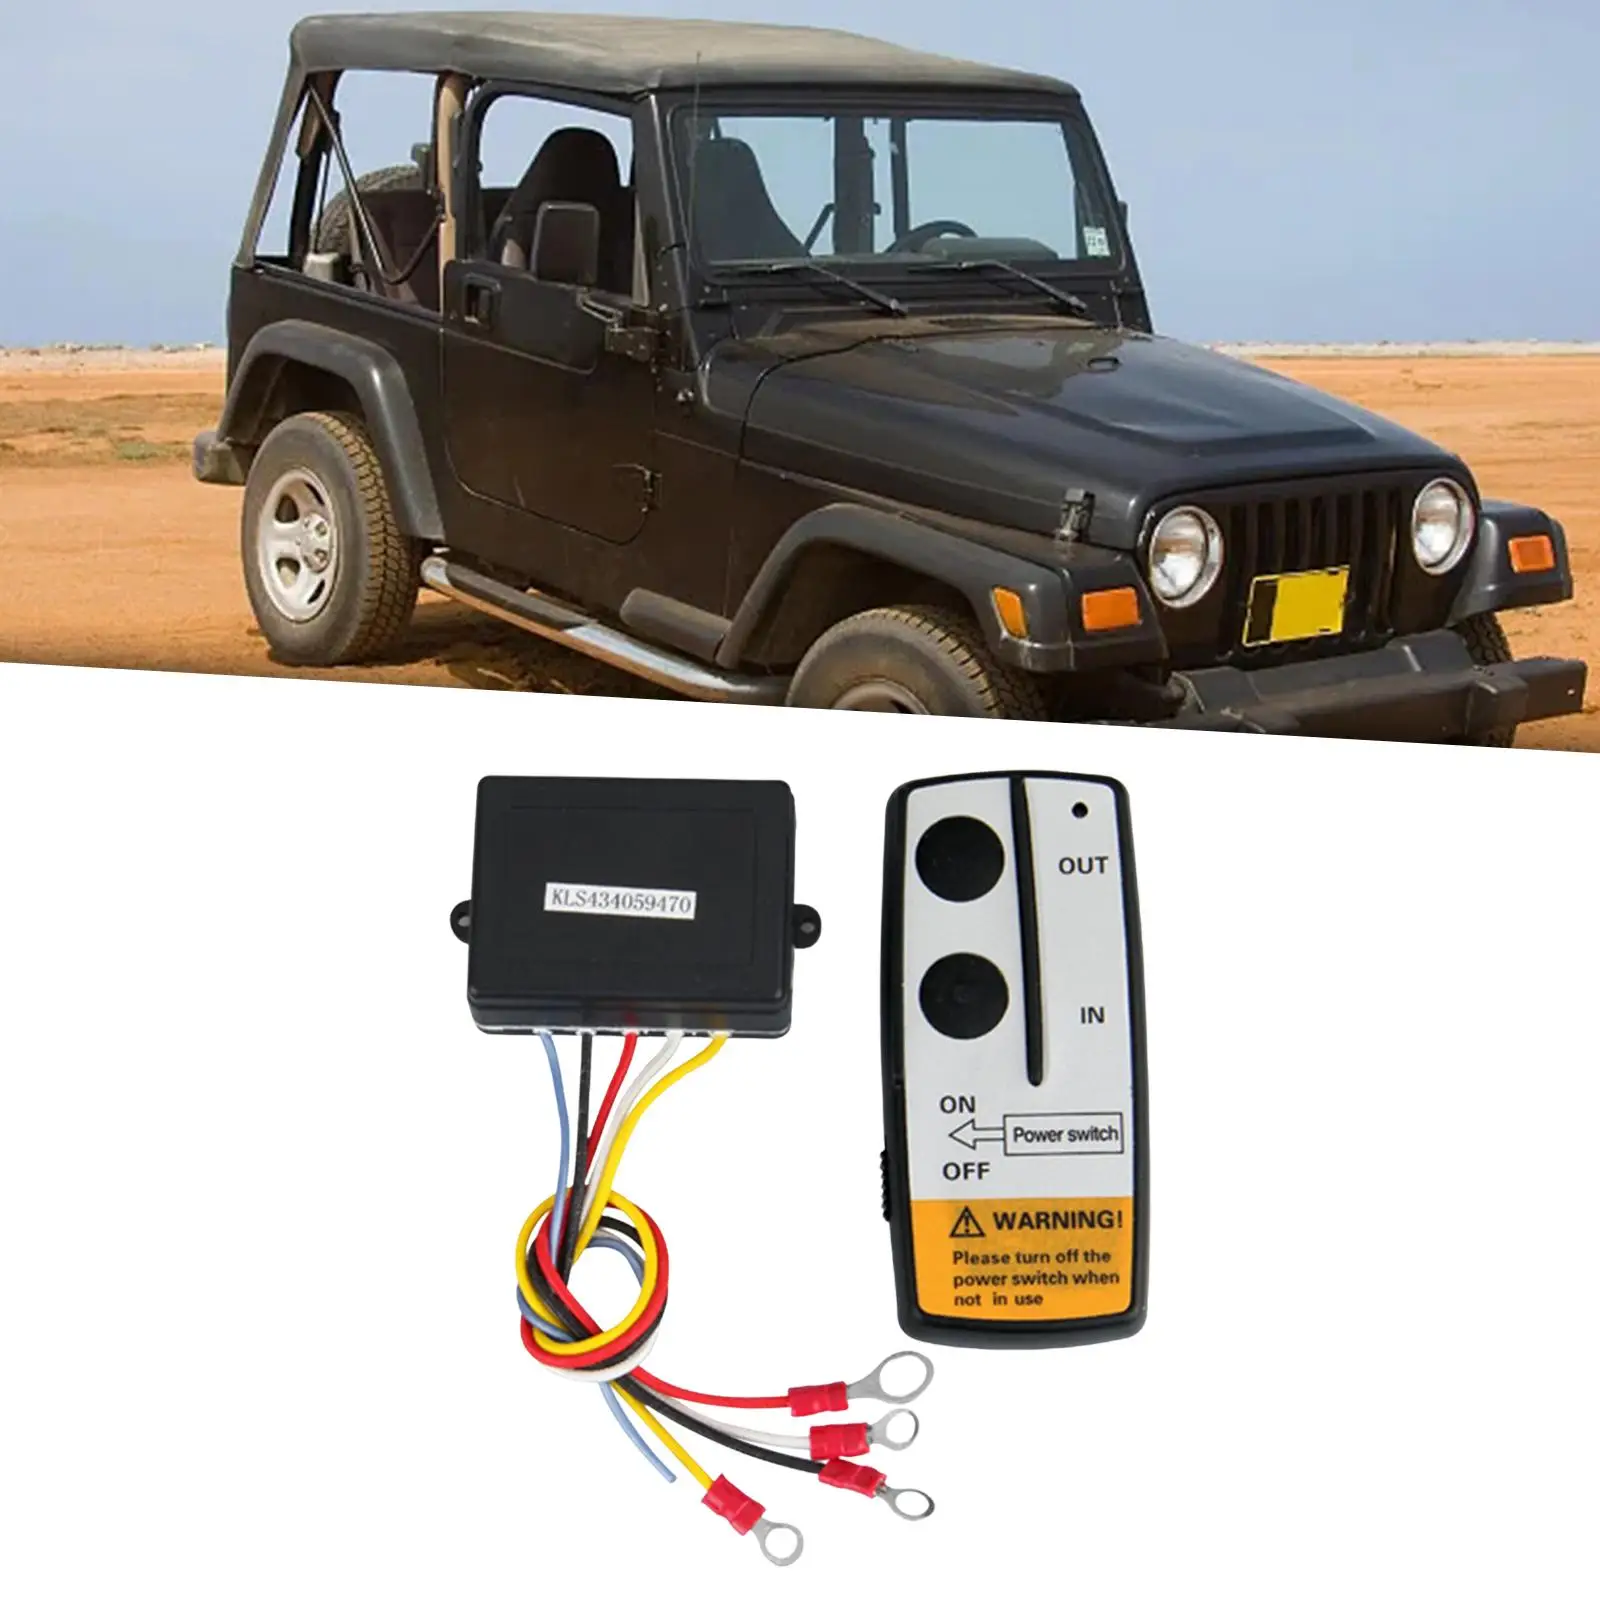 Winch Controller Universal High Performance Spare Parts Winch Electric Remote Control Replacement for SUV Car UTV Truck ATV